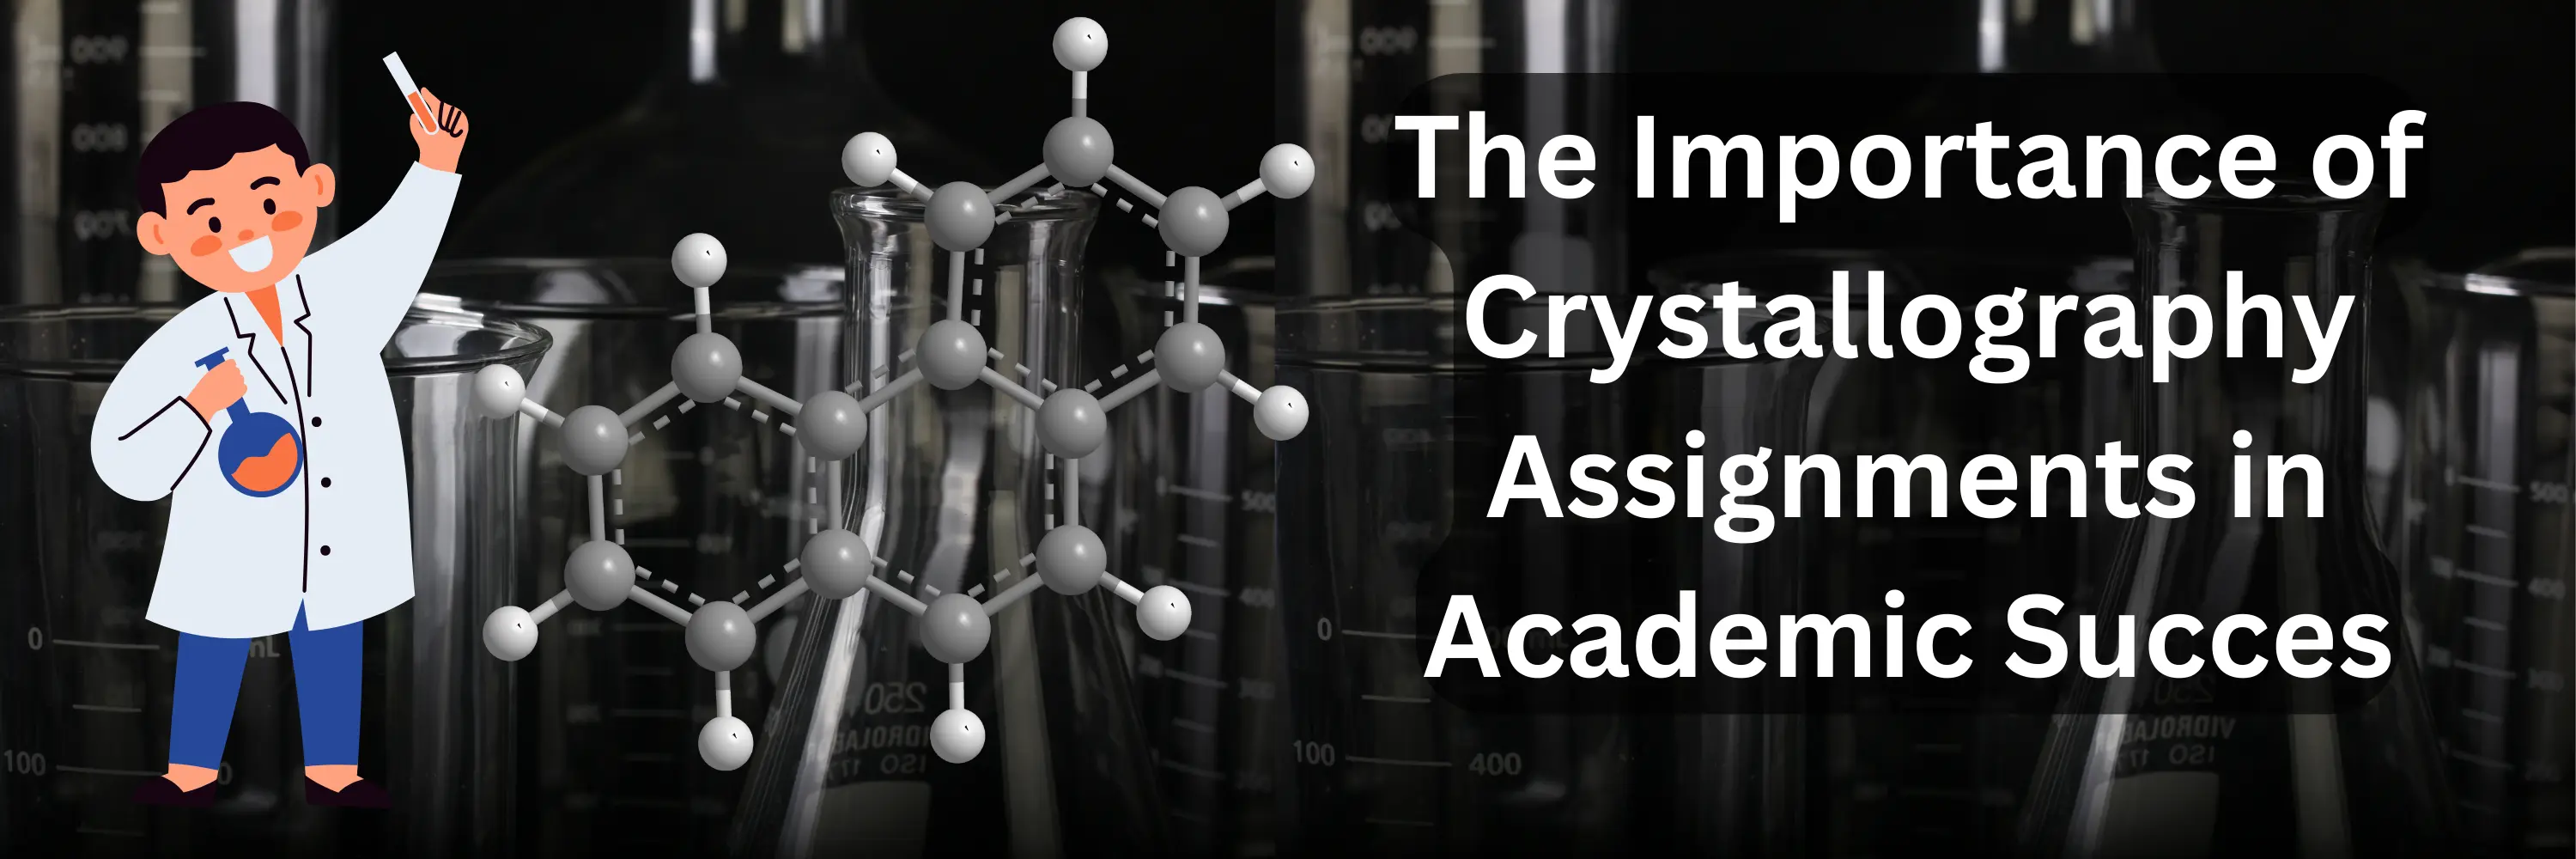 The Importance of Crystallography Assignments in Academic Success